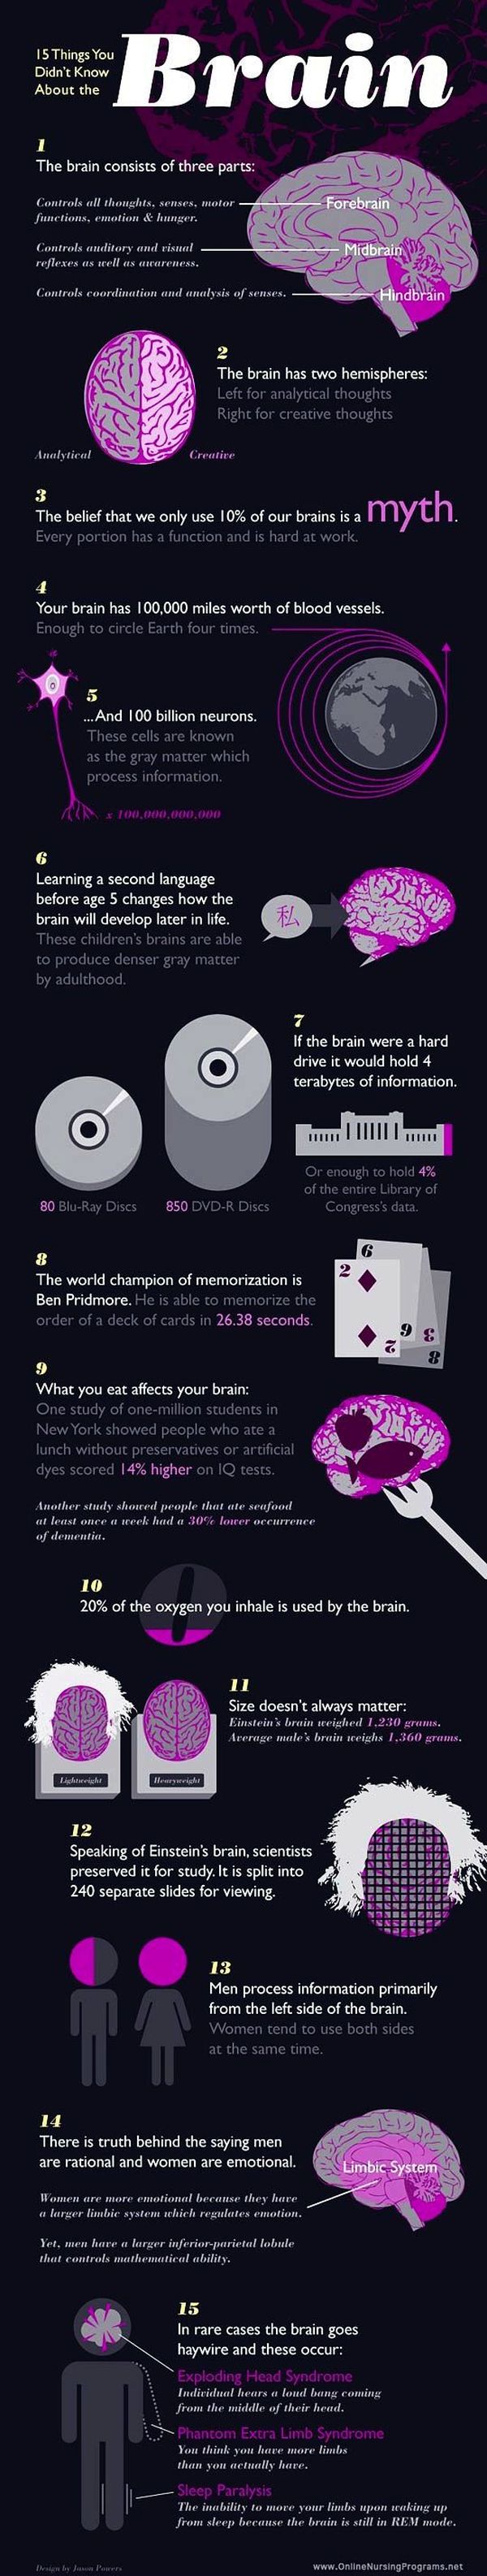 15 Things You Didn't Know About the Brain (1 pic)